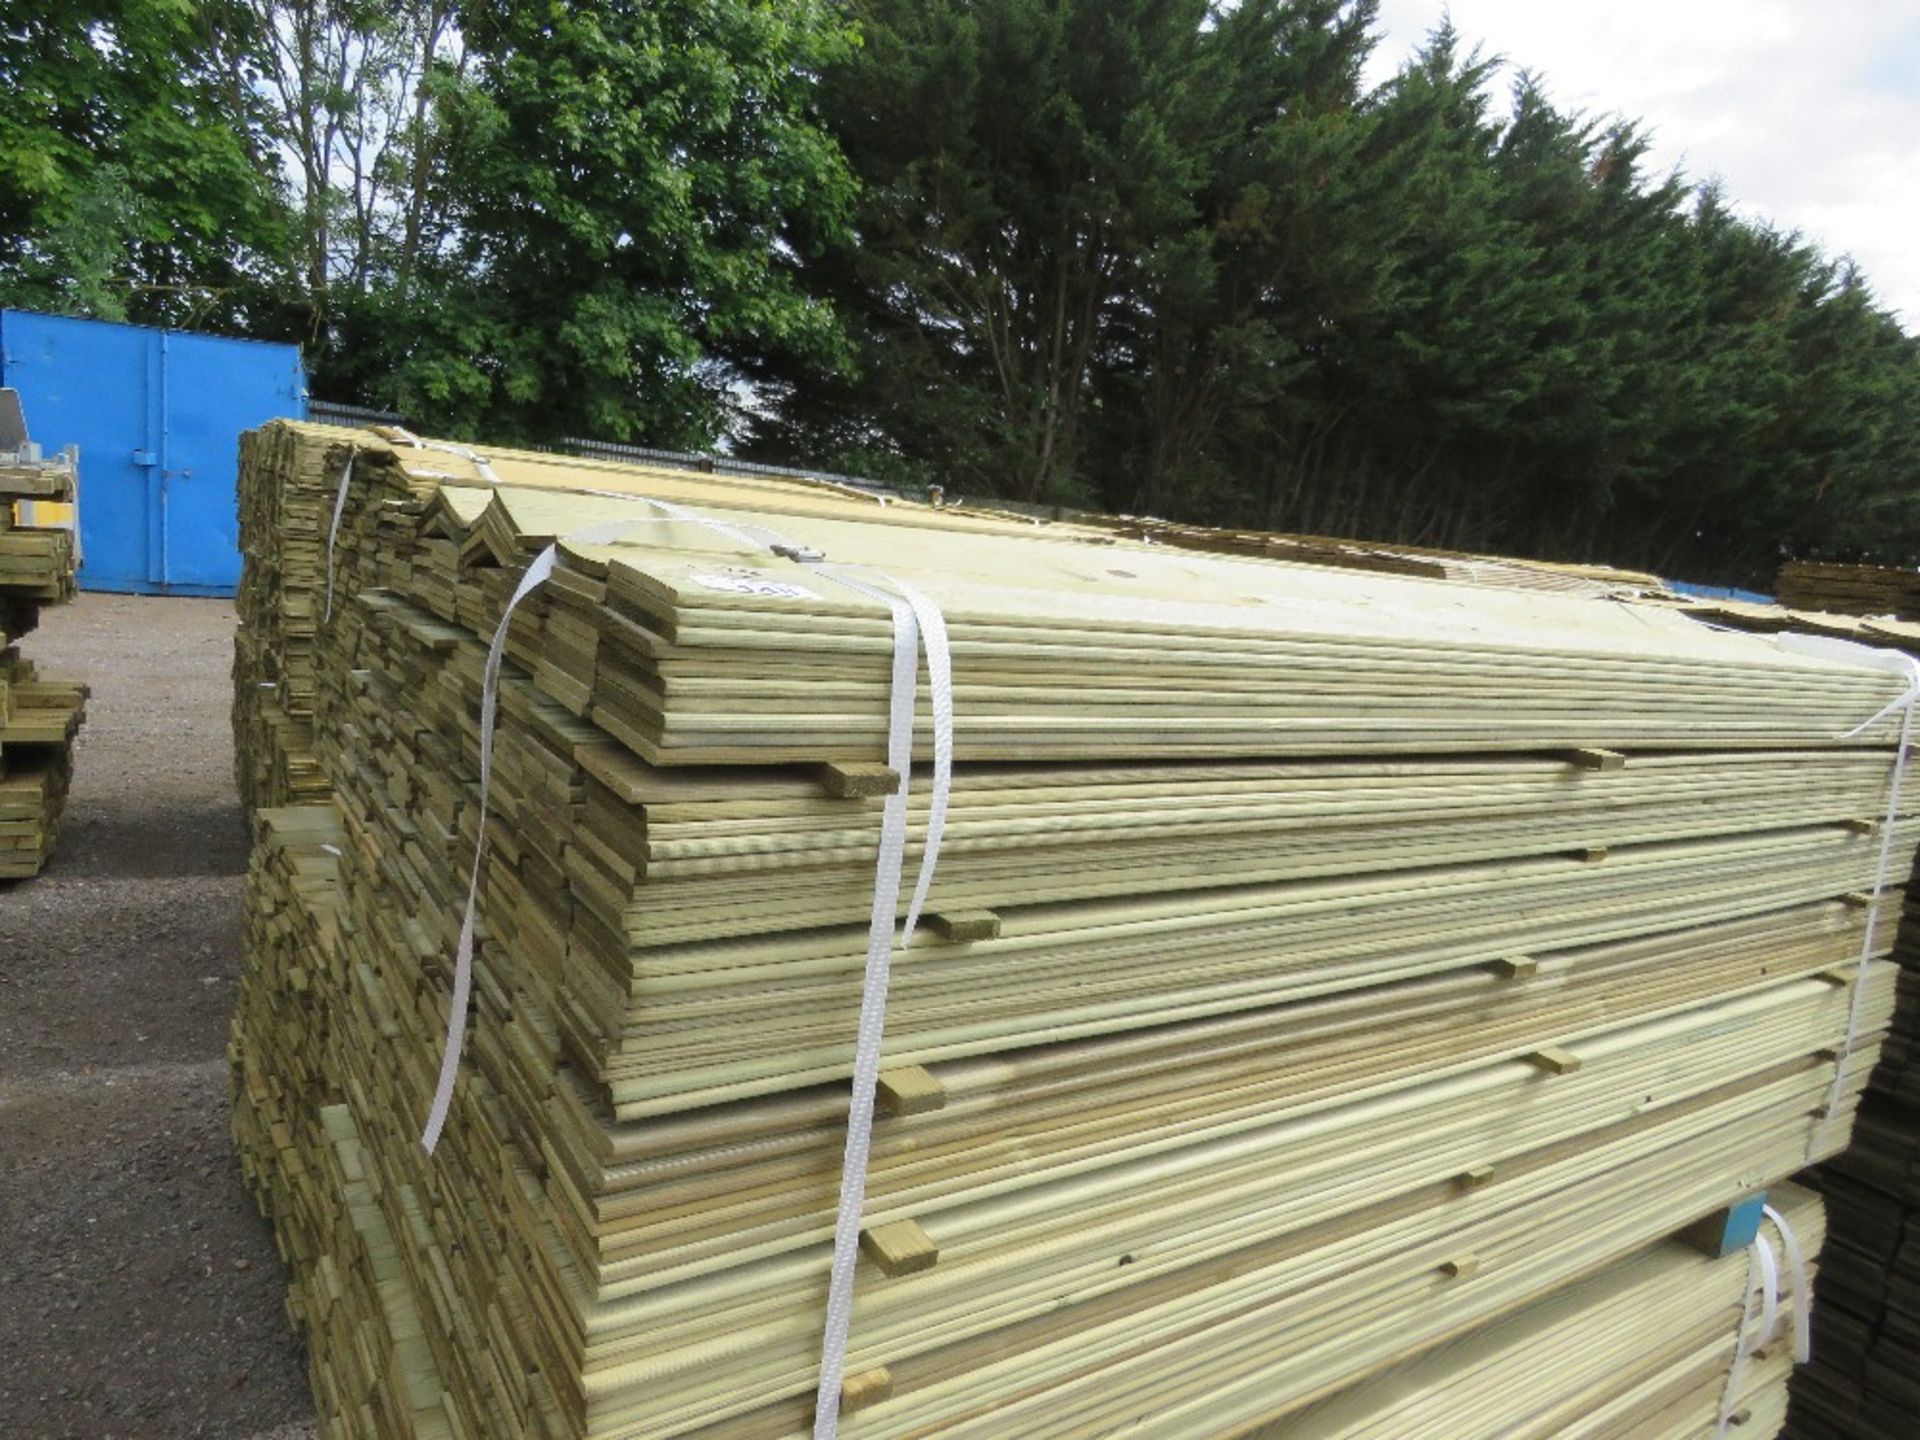 LARGE PACK OF PRESSURE TREATED HIT AND MISS TIMBER CLADDING BOARDS FOR FENCING PANELS ETC @ 1.74M